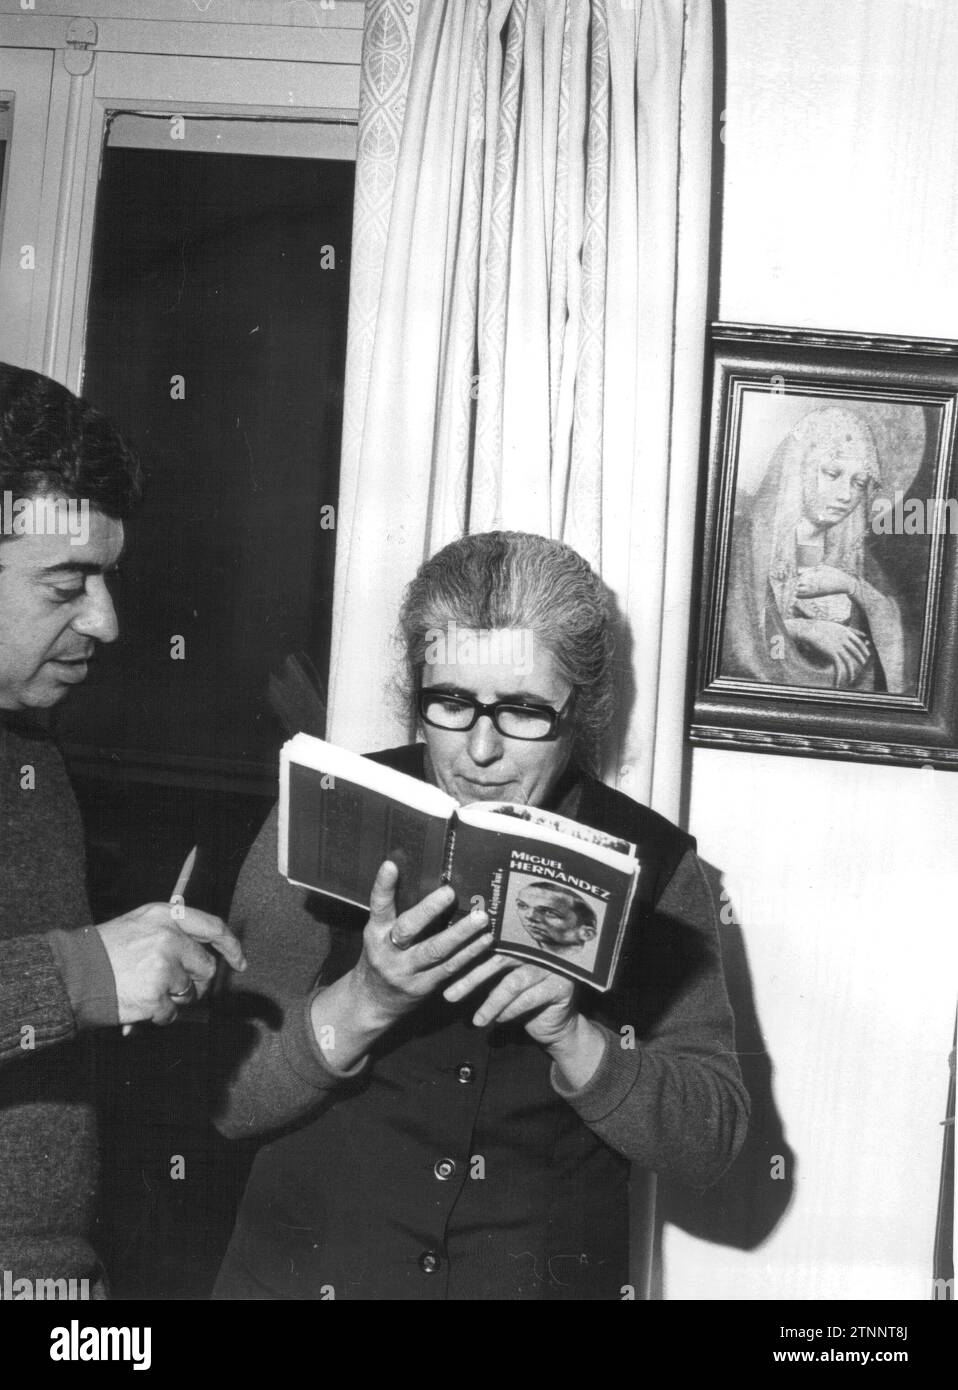 03/17/1972. Josefina Manresa, widow of Miguel Hernández, Interviewed by Tico Medina for Abc on the occasion of the 30th anniversary of the Poet's death. Credit: Album / Archivo ABC / Luis Alonso Stock Photo